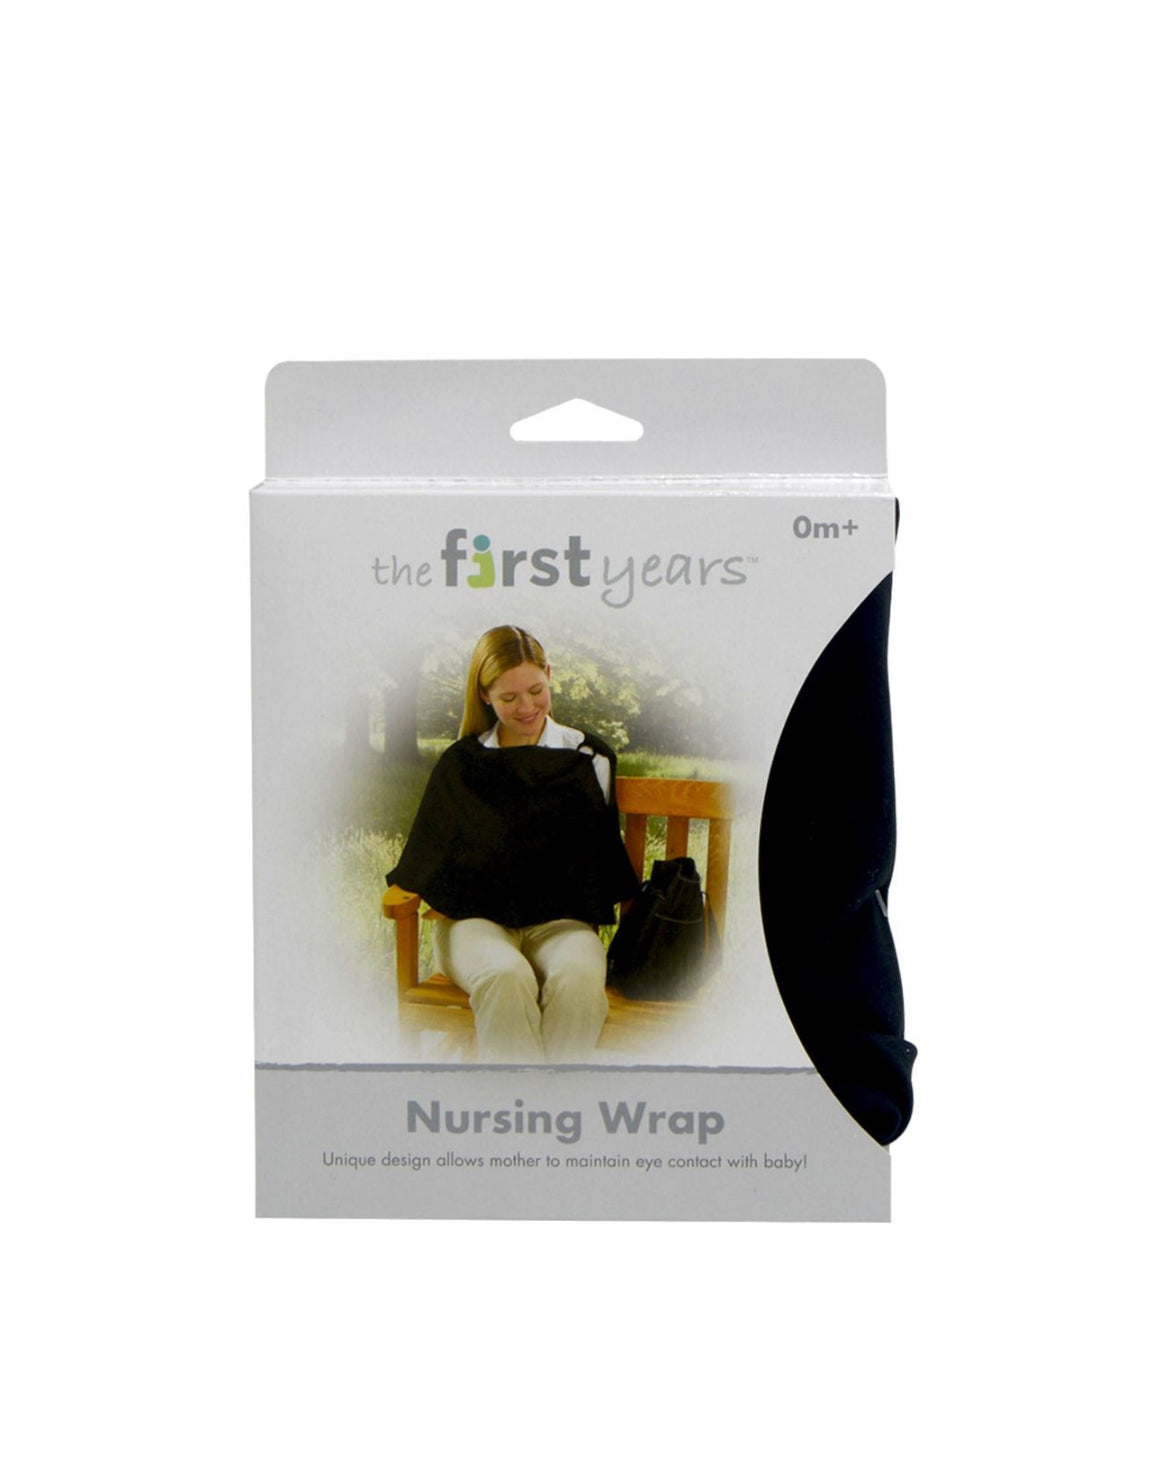 Nursing Privacy Wrap - Black by The First Years.